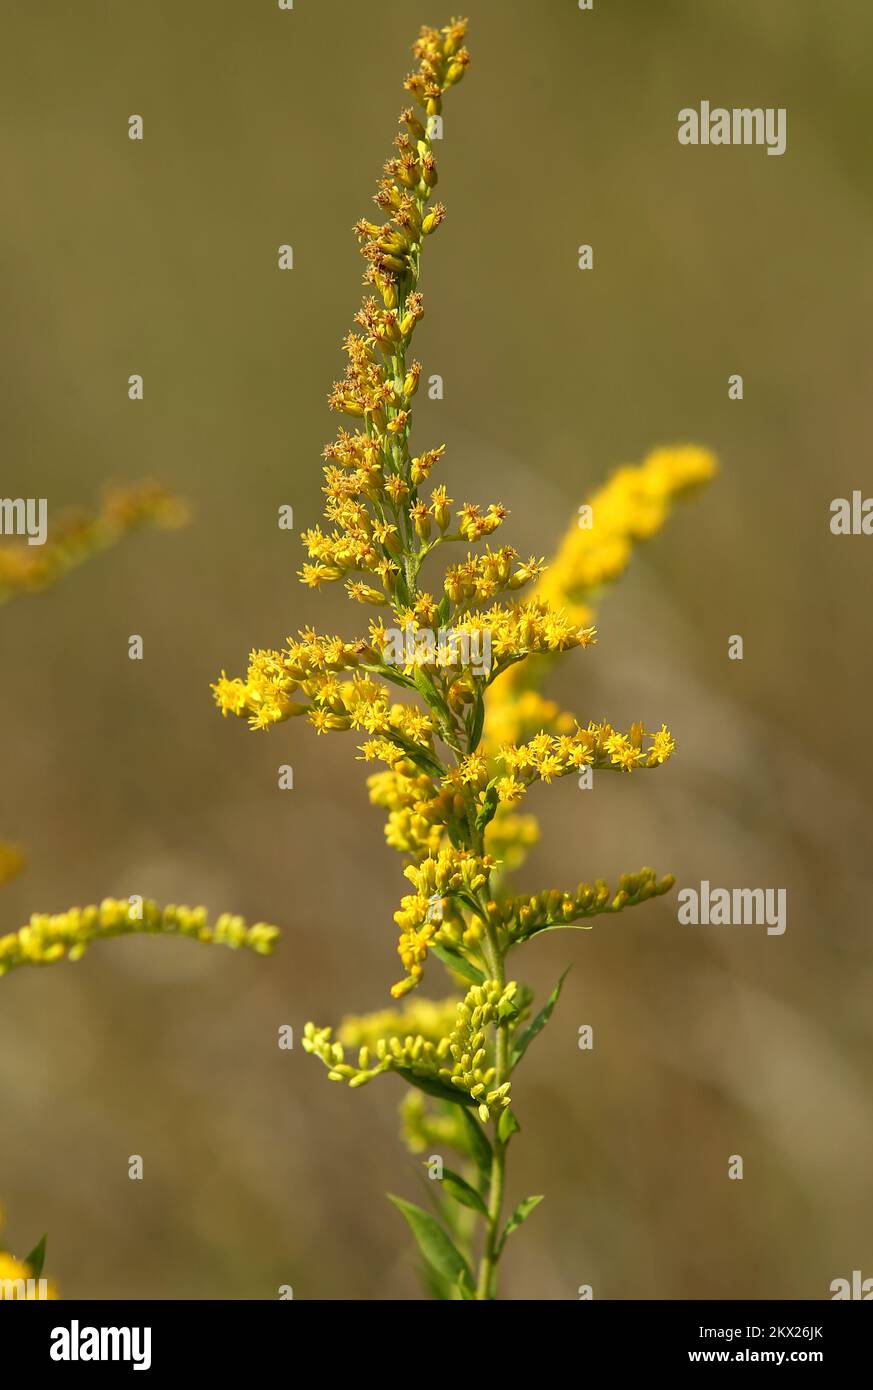 21.08.2017., Zagreb, Croatia - Ragweeds are flowering plants in the genus Ambrosia in the aster family, Asteraceae that often cause allergic symptoms. Photo: Robert Anic/PIXSELL  Stock Photo